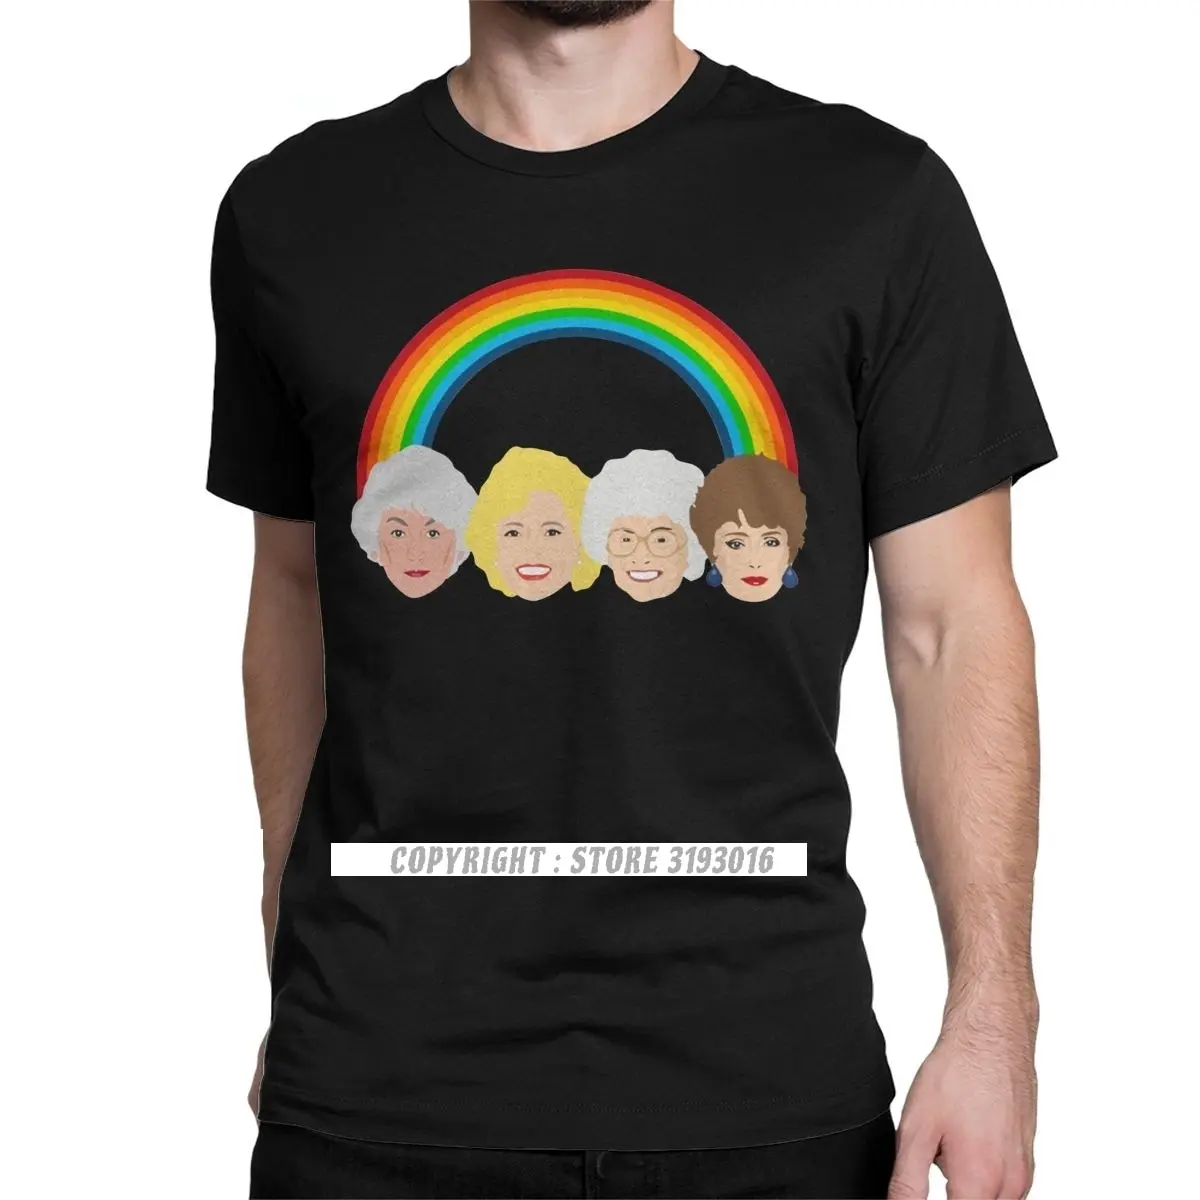 

Vintage Classic Men T-Shirt The Golden Girls LGBT Pride Graphic Tshirt Camisas 80s Friend TV 3D Tshirts Round Neck Tops Male